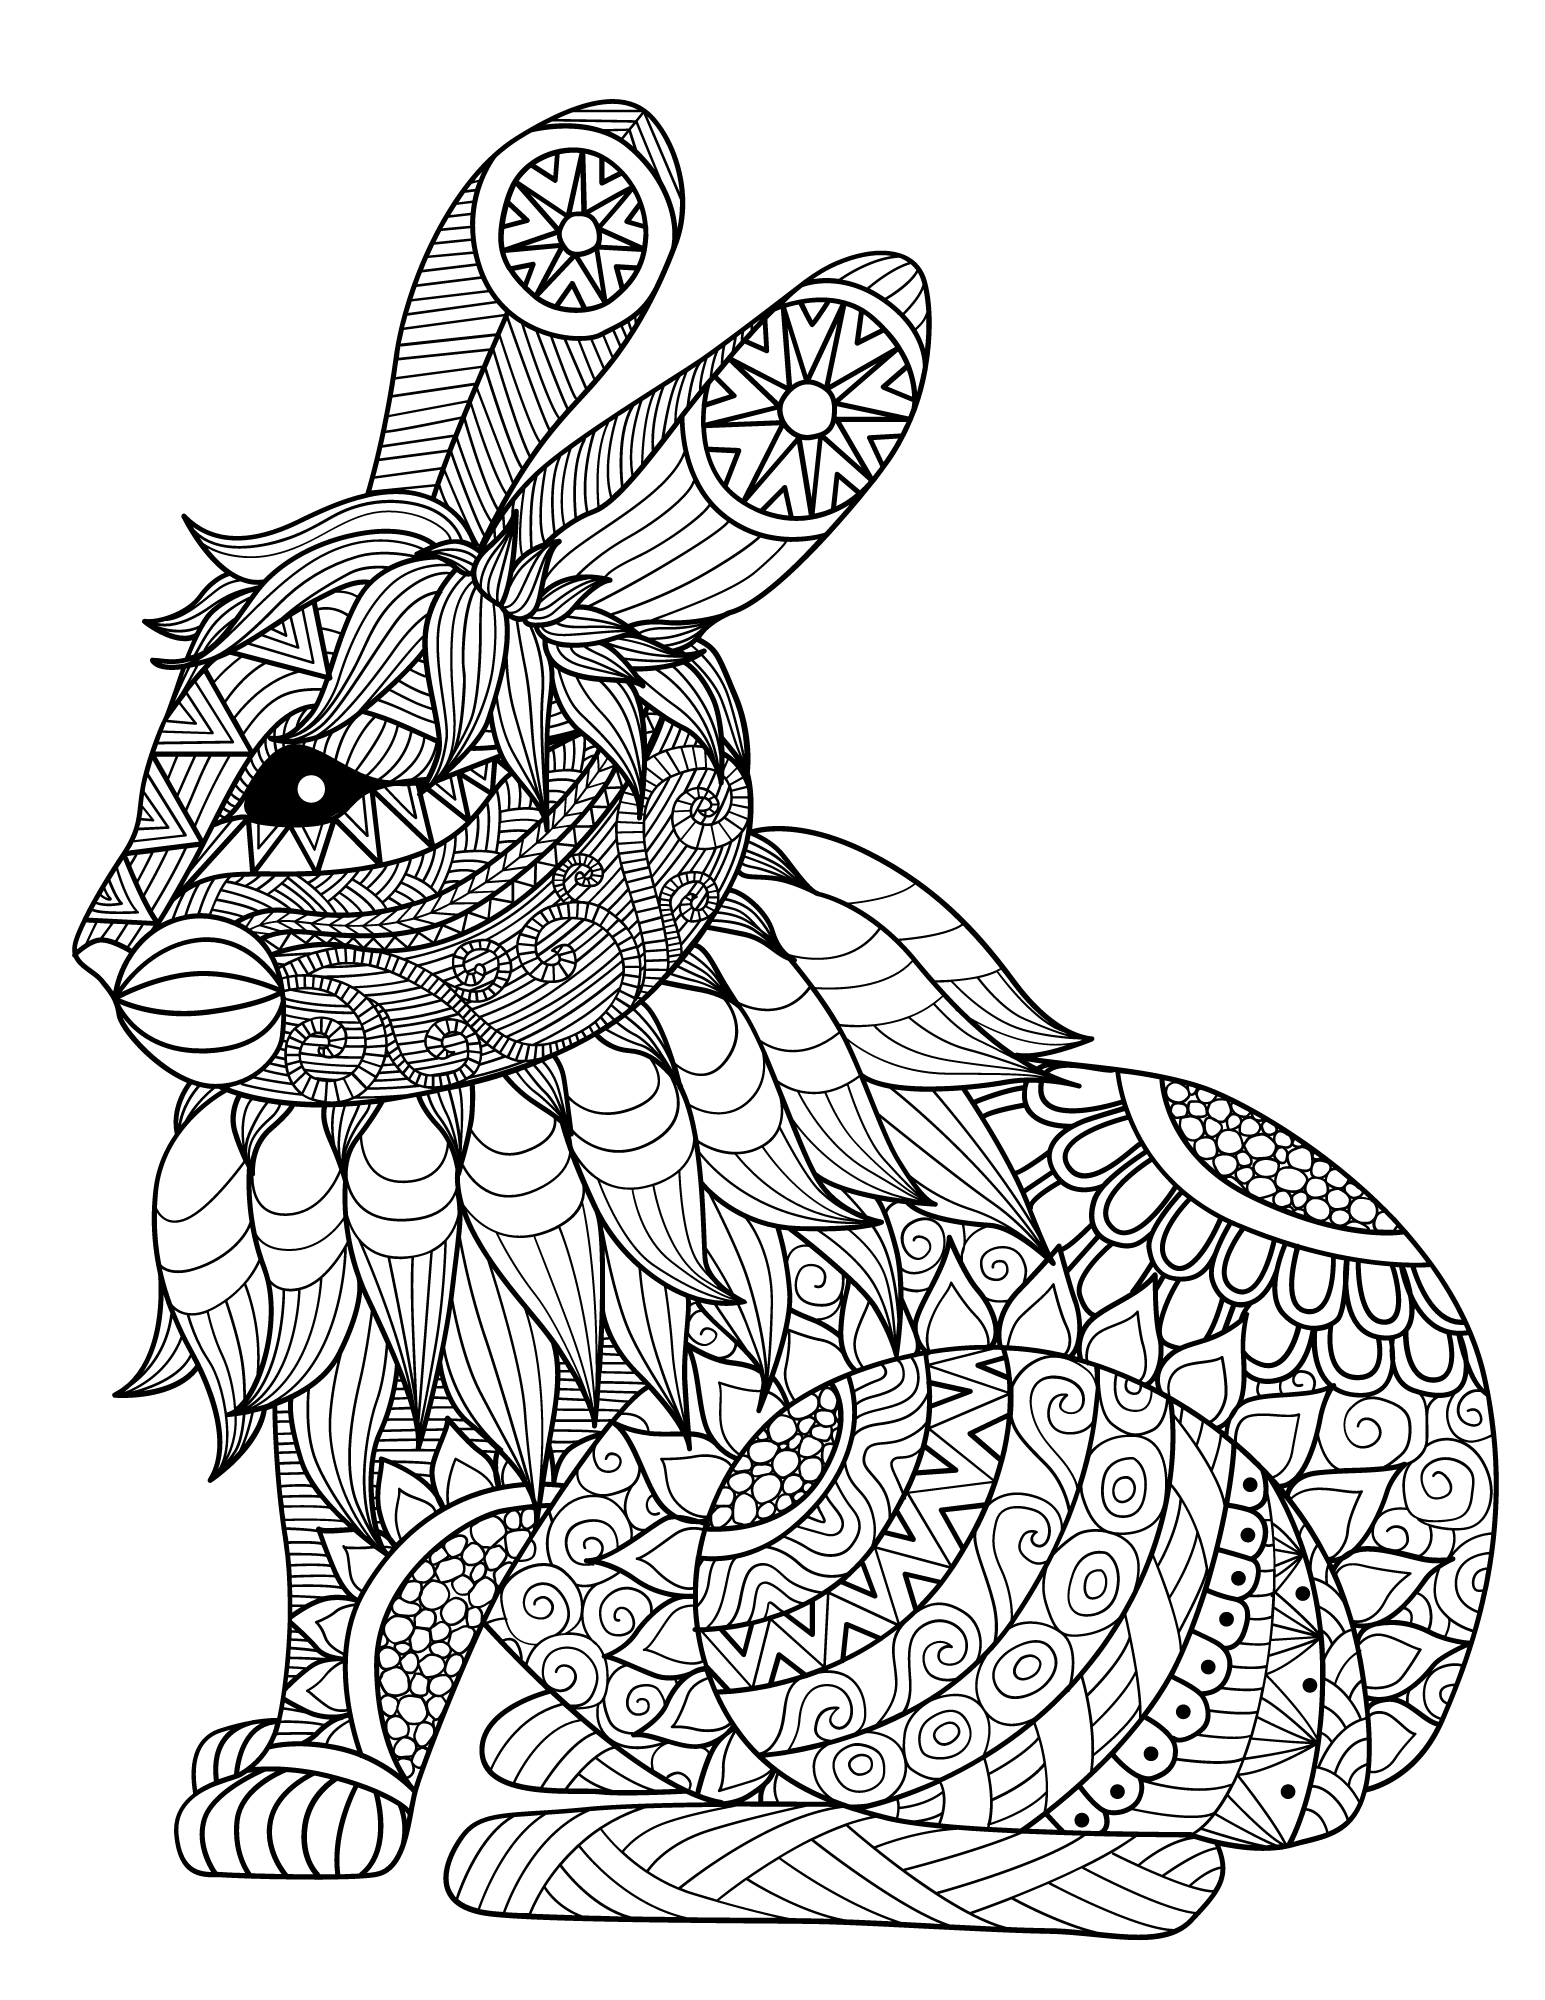 Zentangle Bunny coloring page